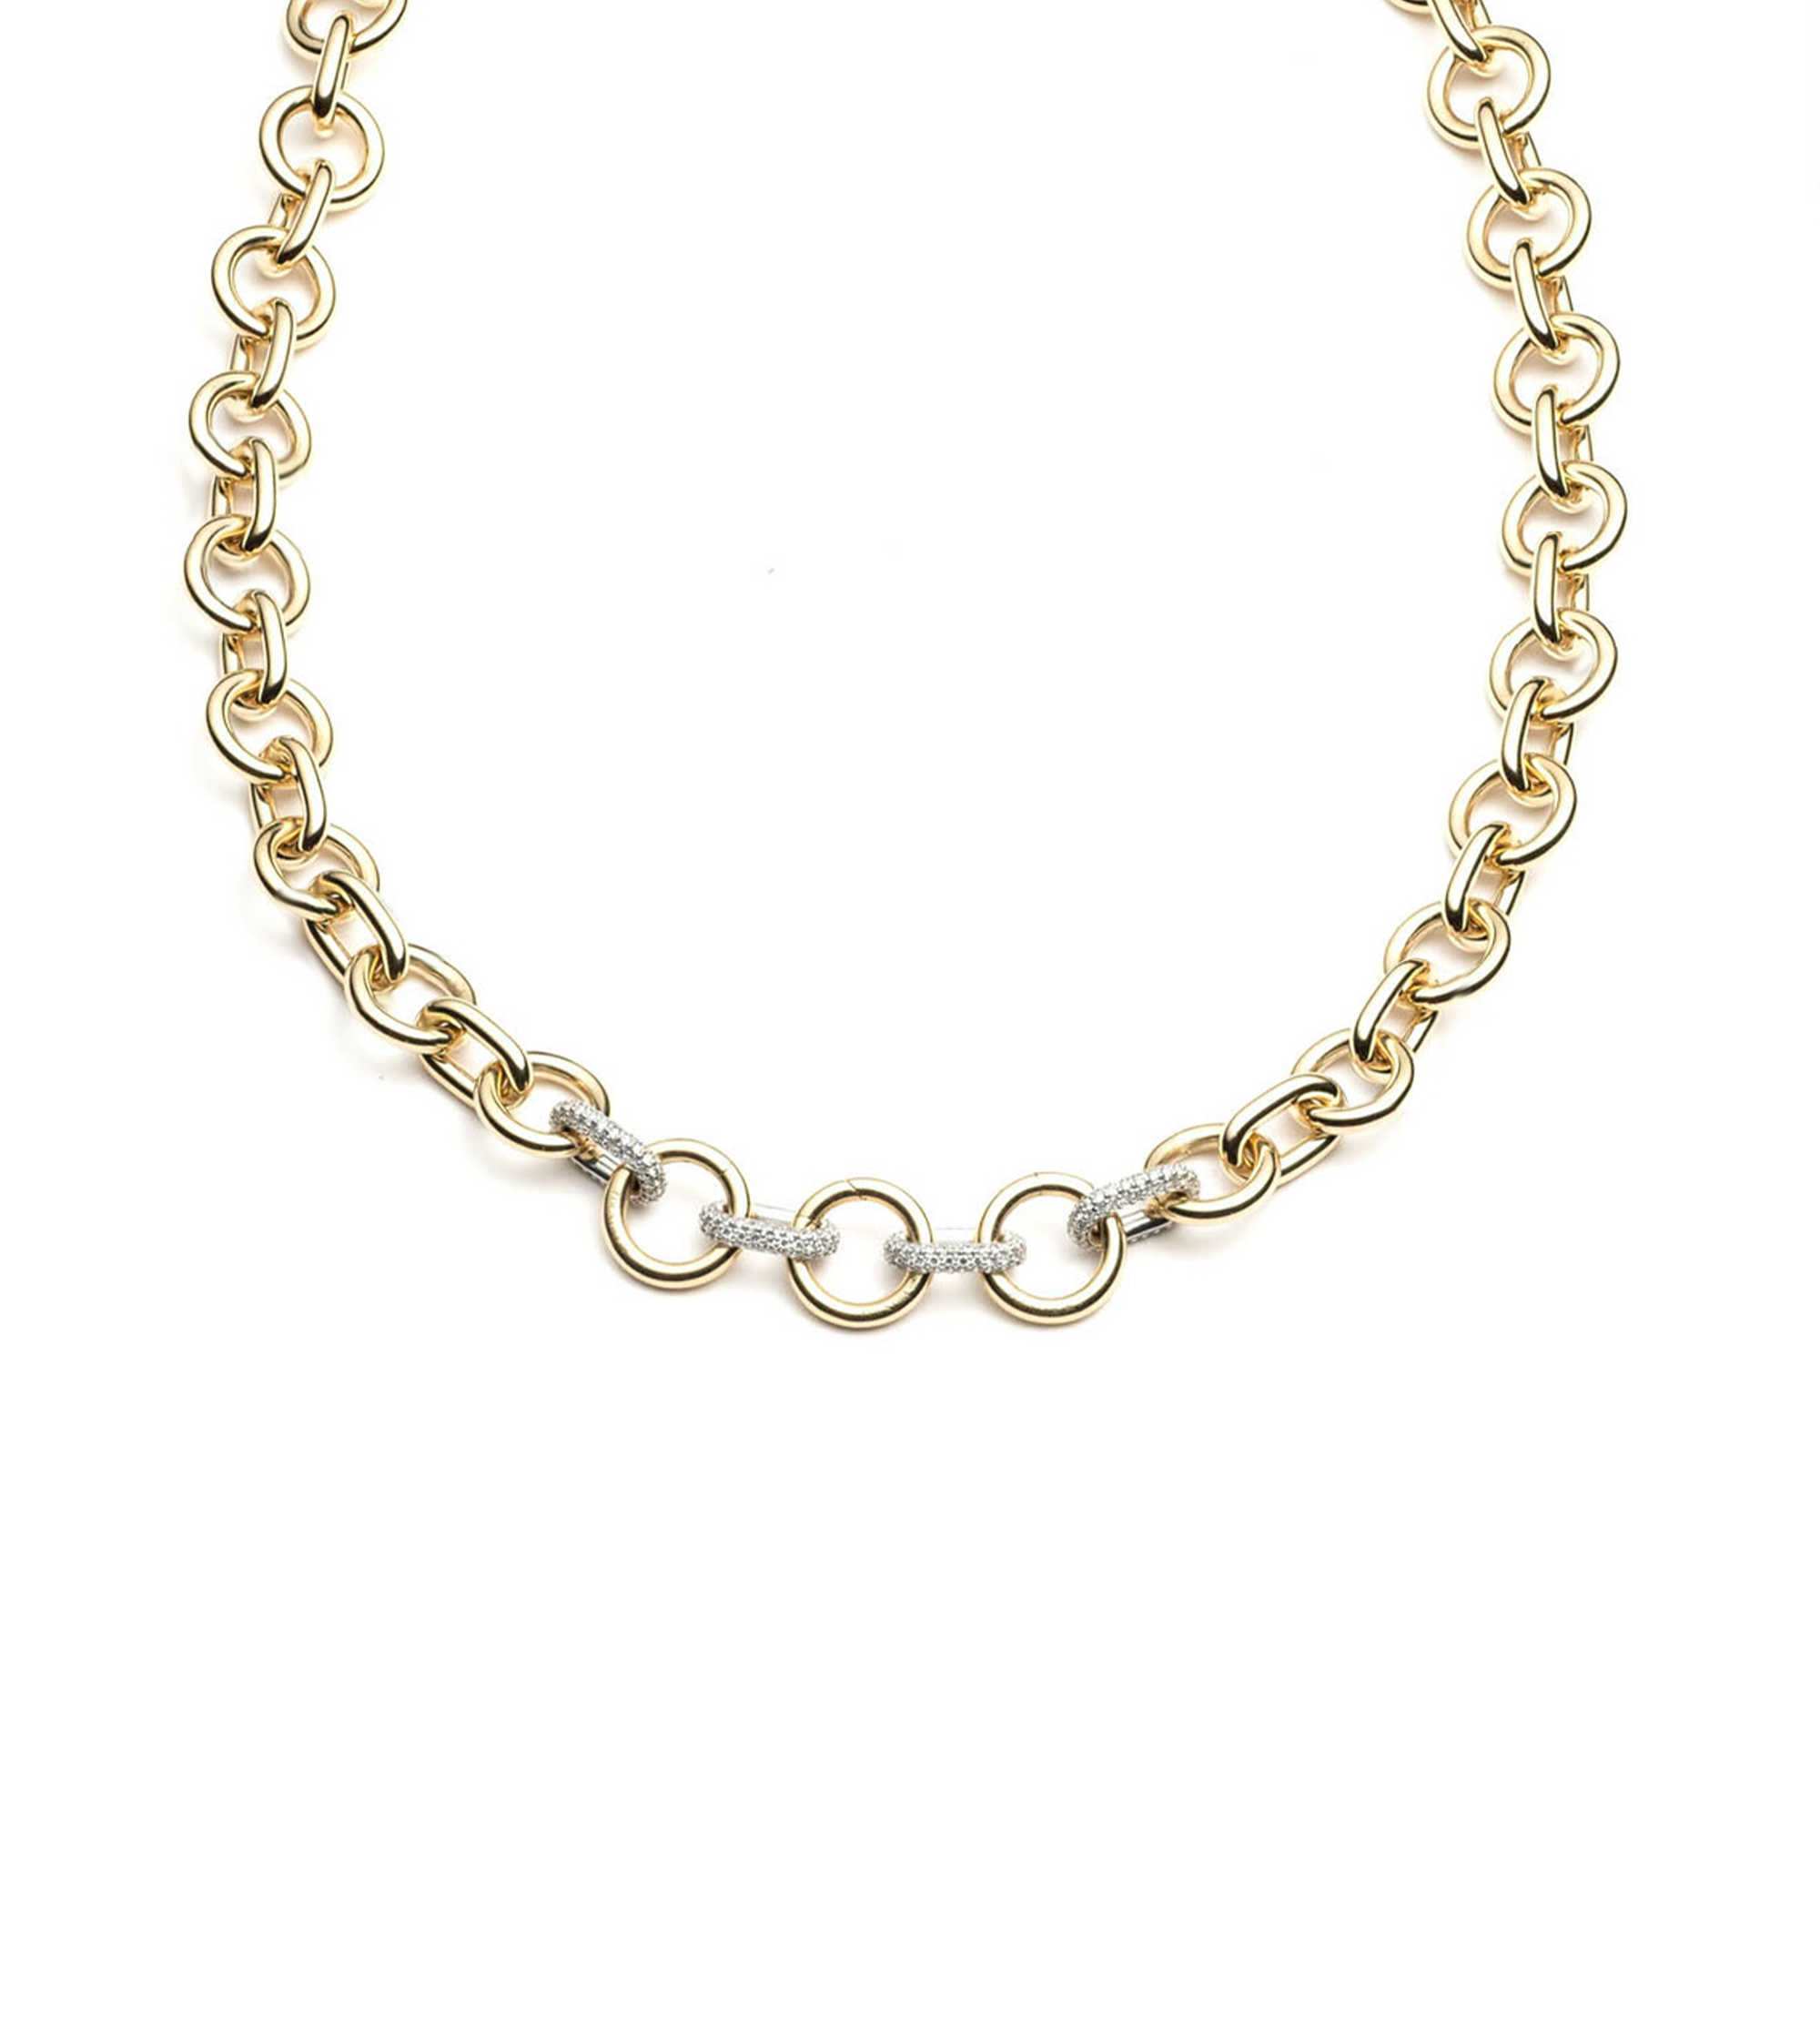 18" Oversized Pave Mixed Link Chain